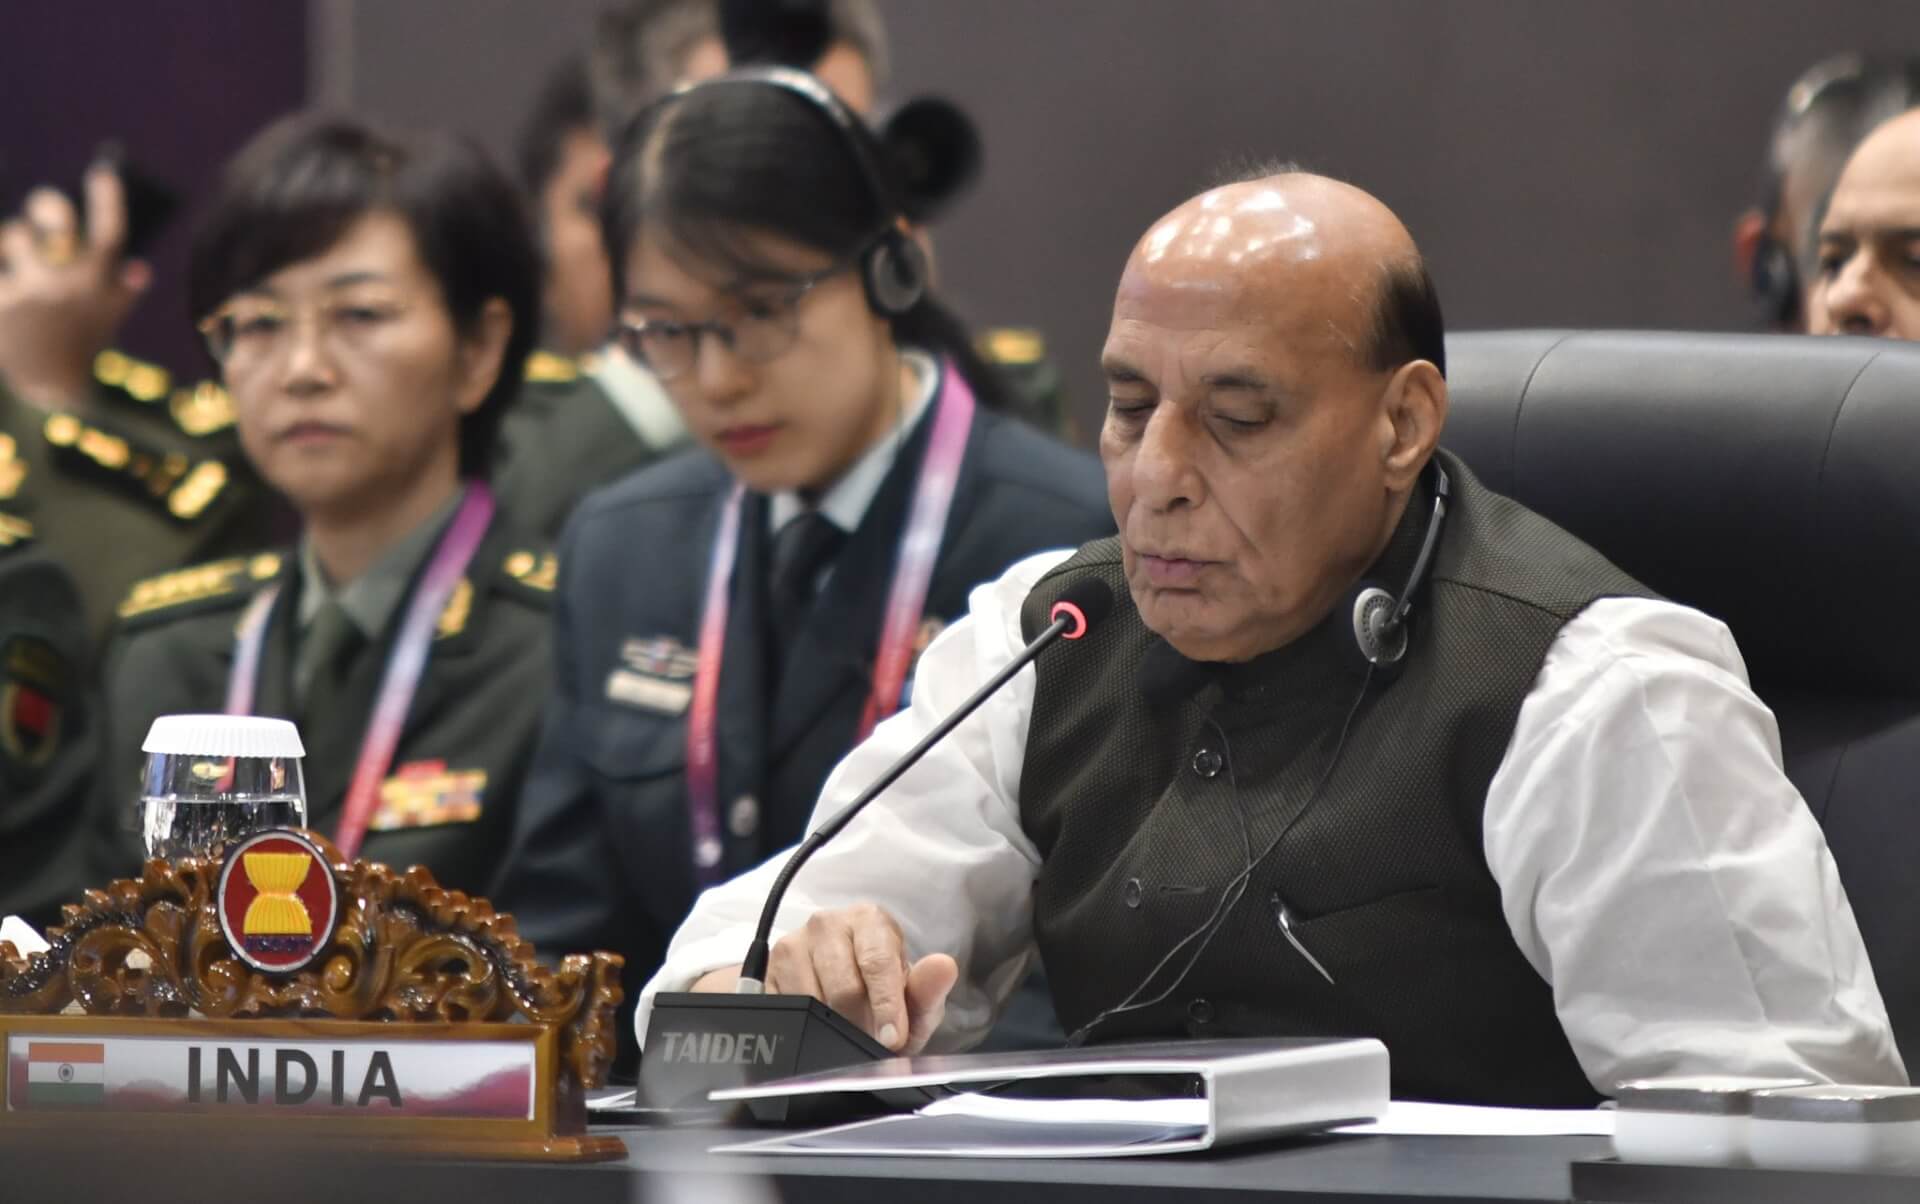 Dialogue, Diplomacy Vital for Enduring Peace, Global Stability: Rajnath Singh at ASEAN Defence Meeting